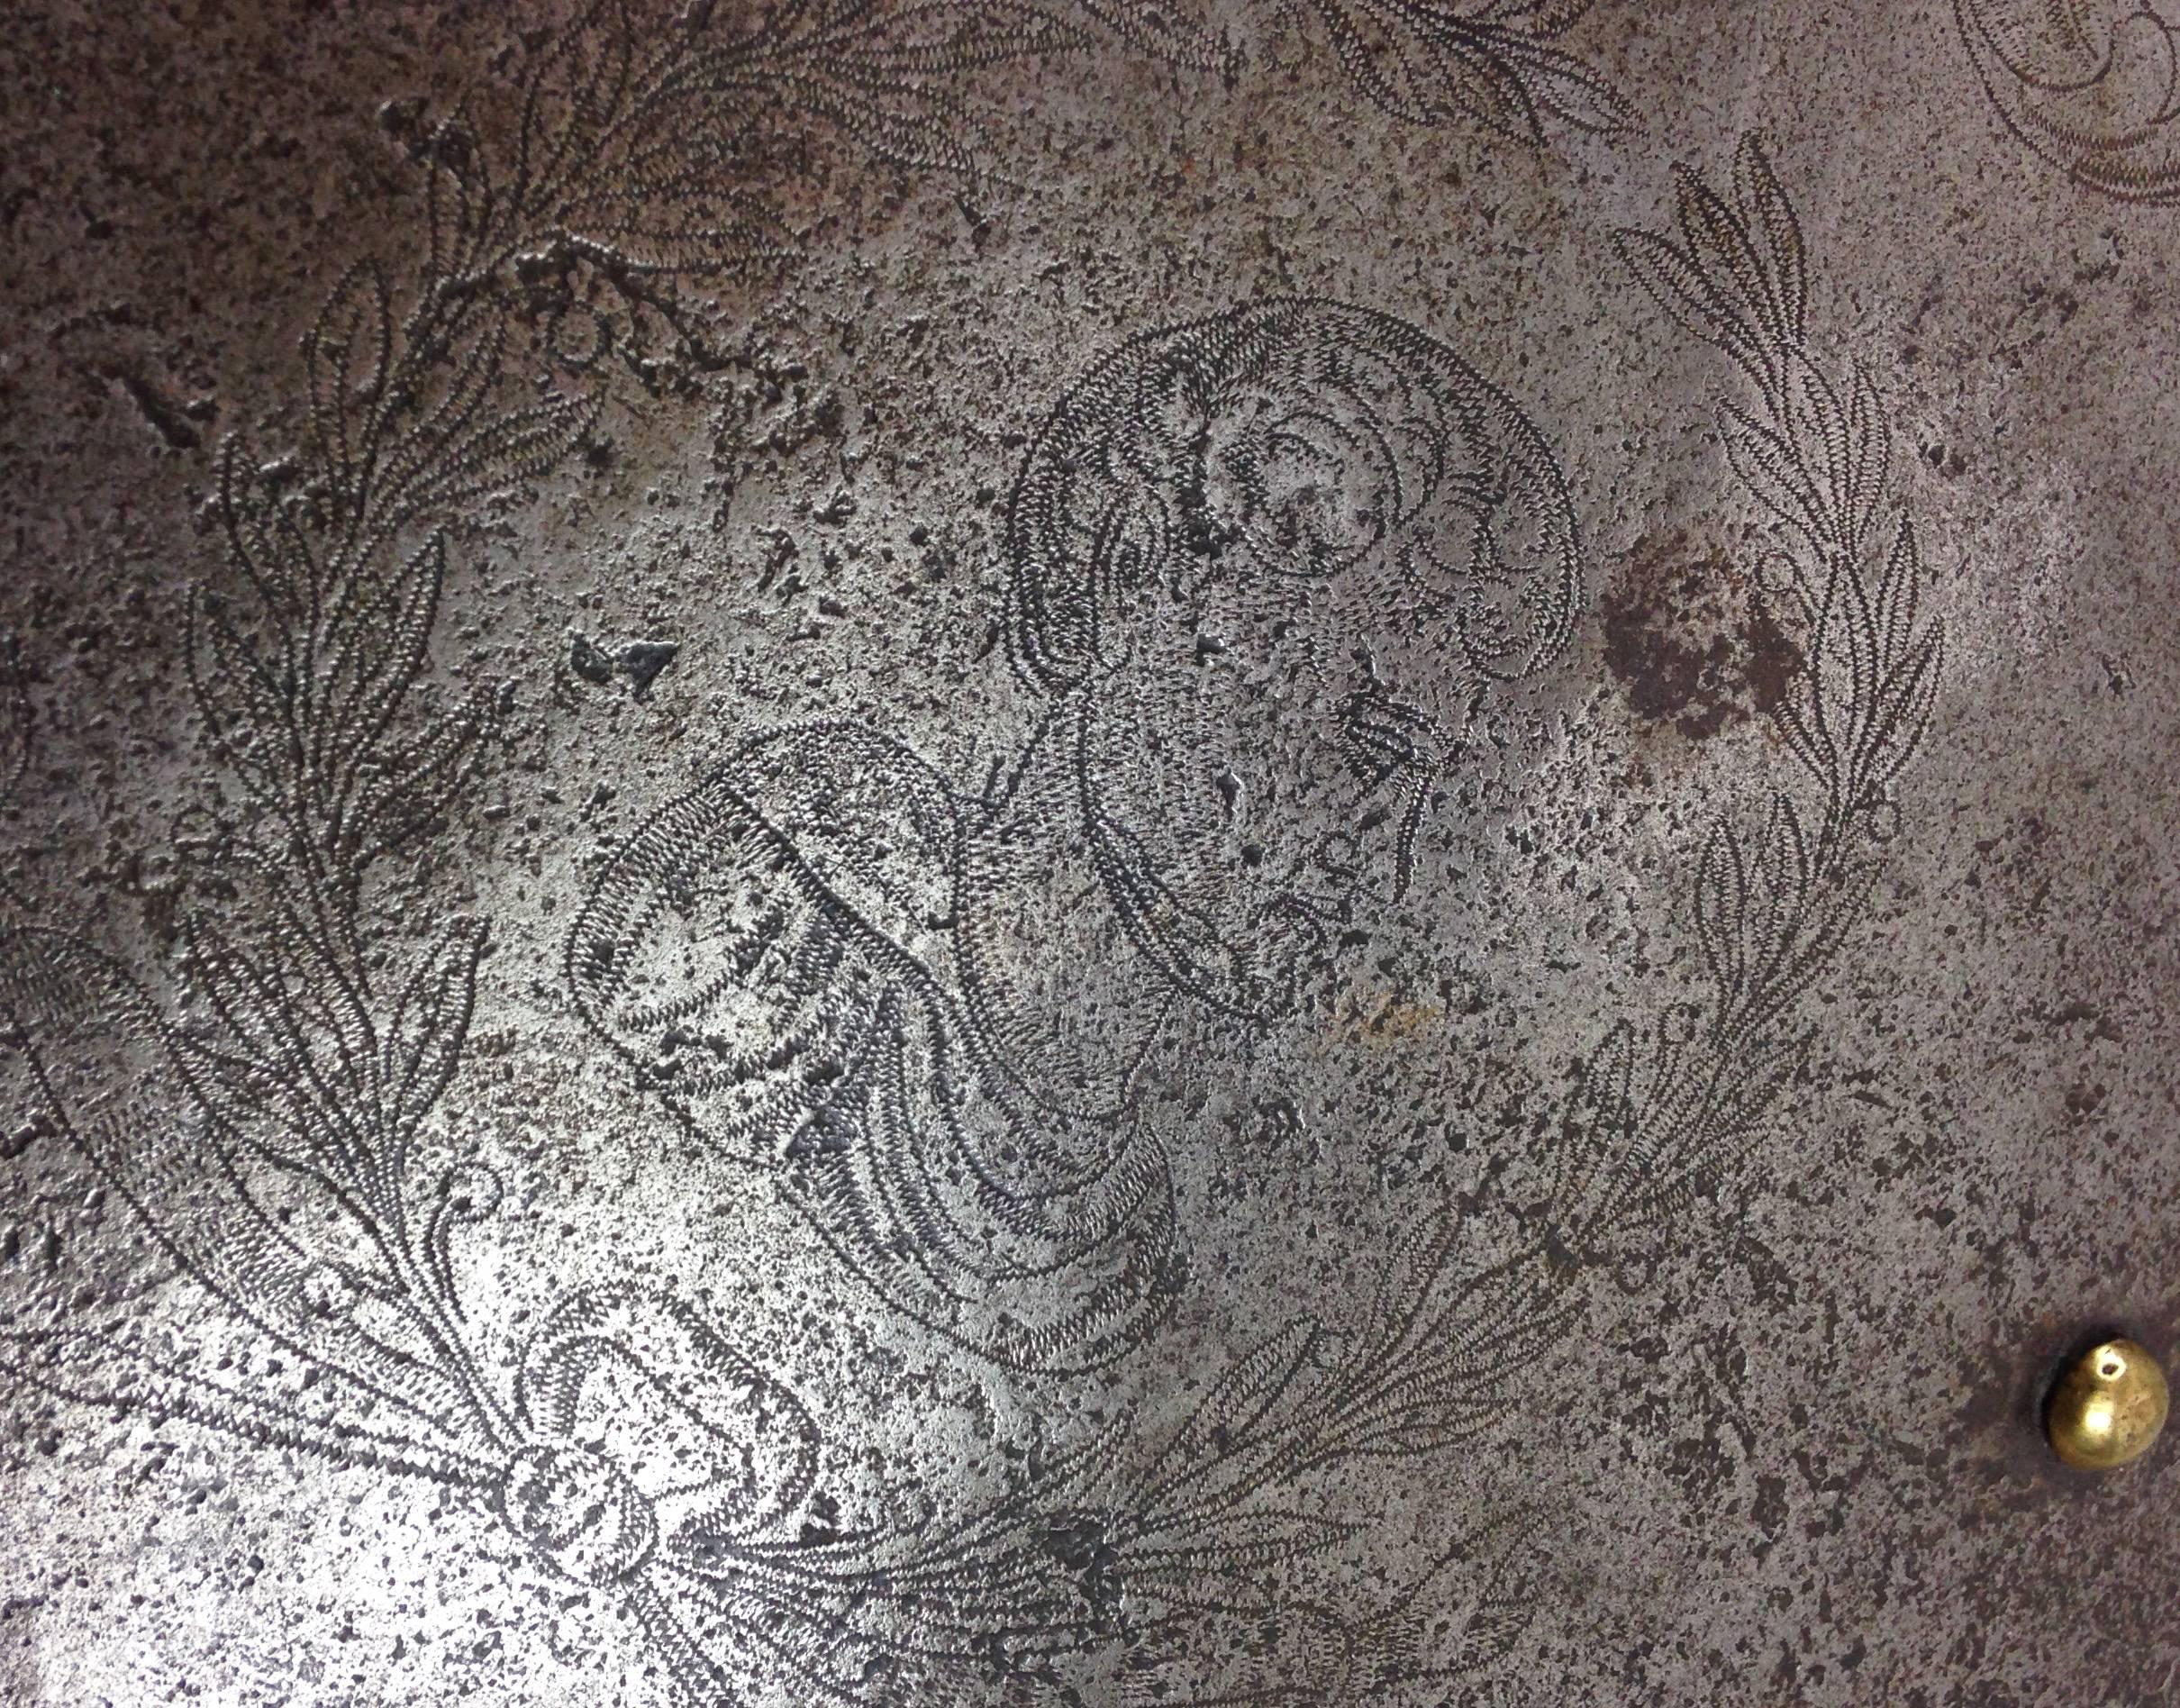 Etched Large Engraved 17th Century European Shield For Sale